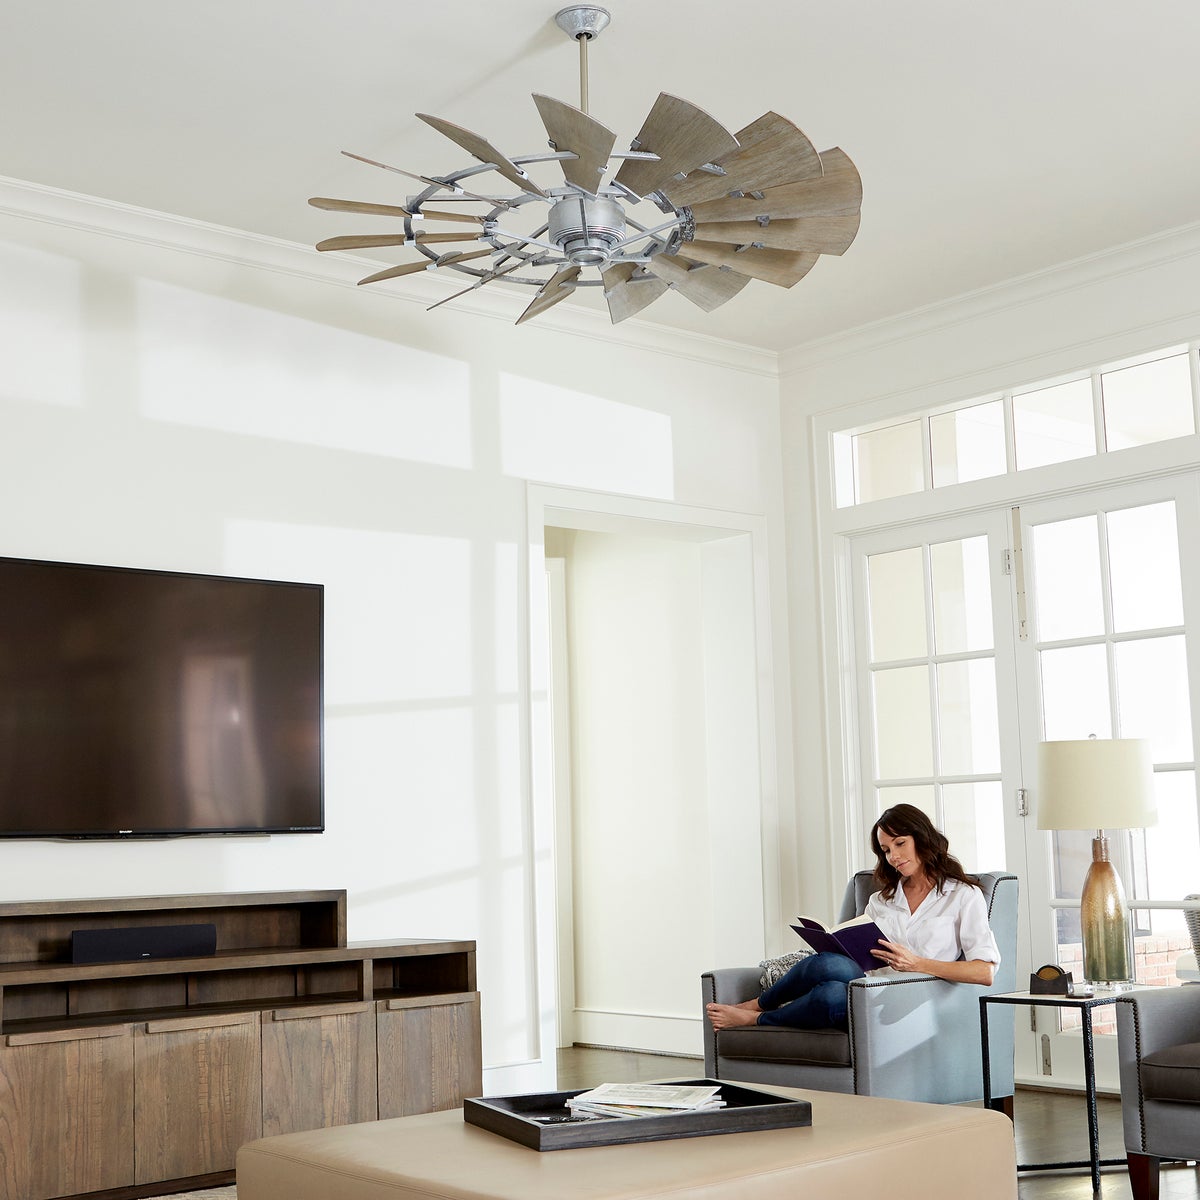 Windmill Ceiling Fan in a rustic living room with a woman sitting in a chair reading a book. Wooden blades, country chic design.